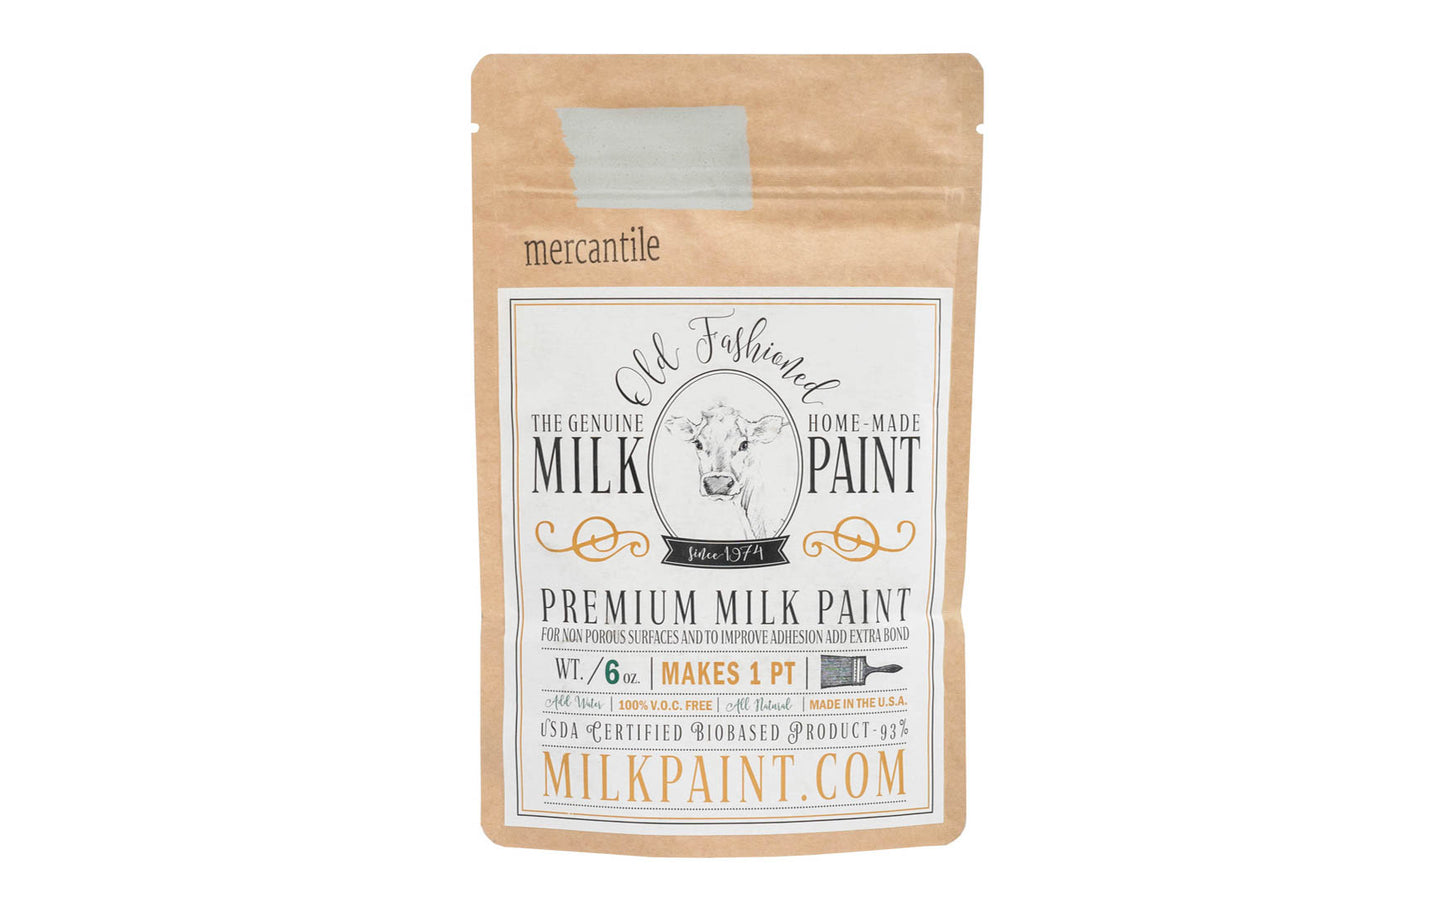 This Milk Paint color is "Mercantile" color - Light neutral gray. Comes in a powder form, you can control how thick/thin you mix the paint. Use it as you would regular paint, thinner for a wash/stain or thicker to create texture. Environmentally safe, non-toxic & is food safe. 100% VOC free. Powder Paint